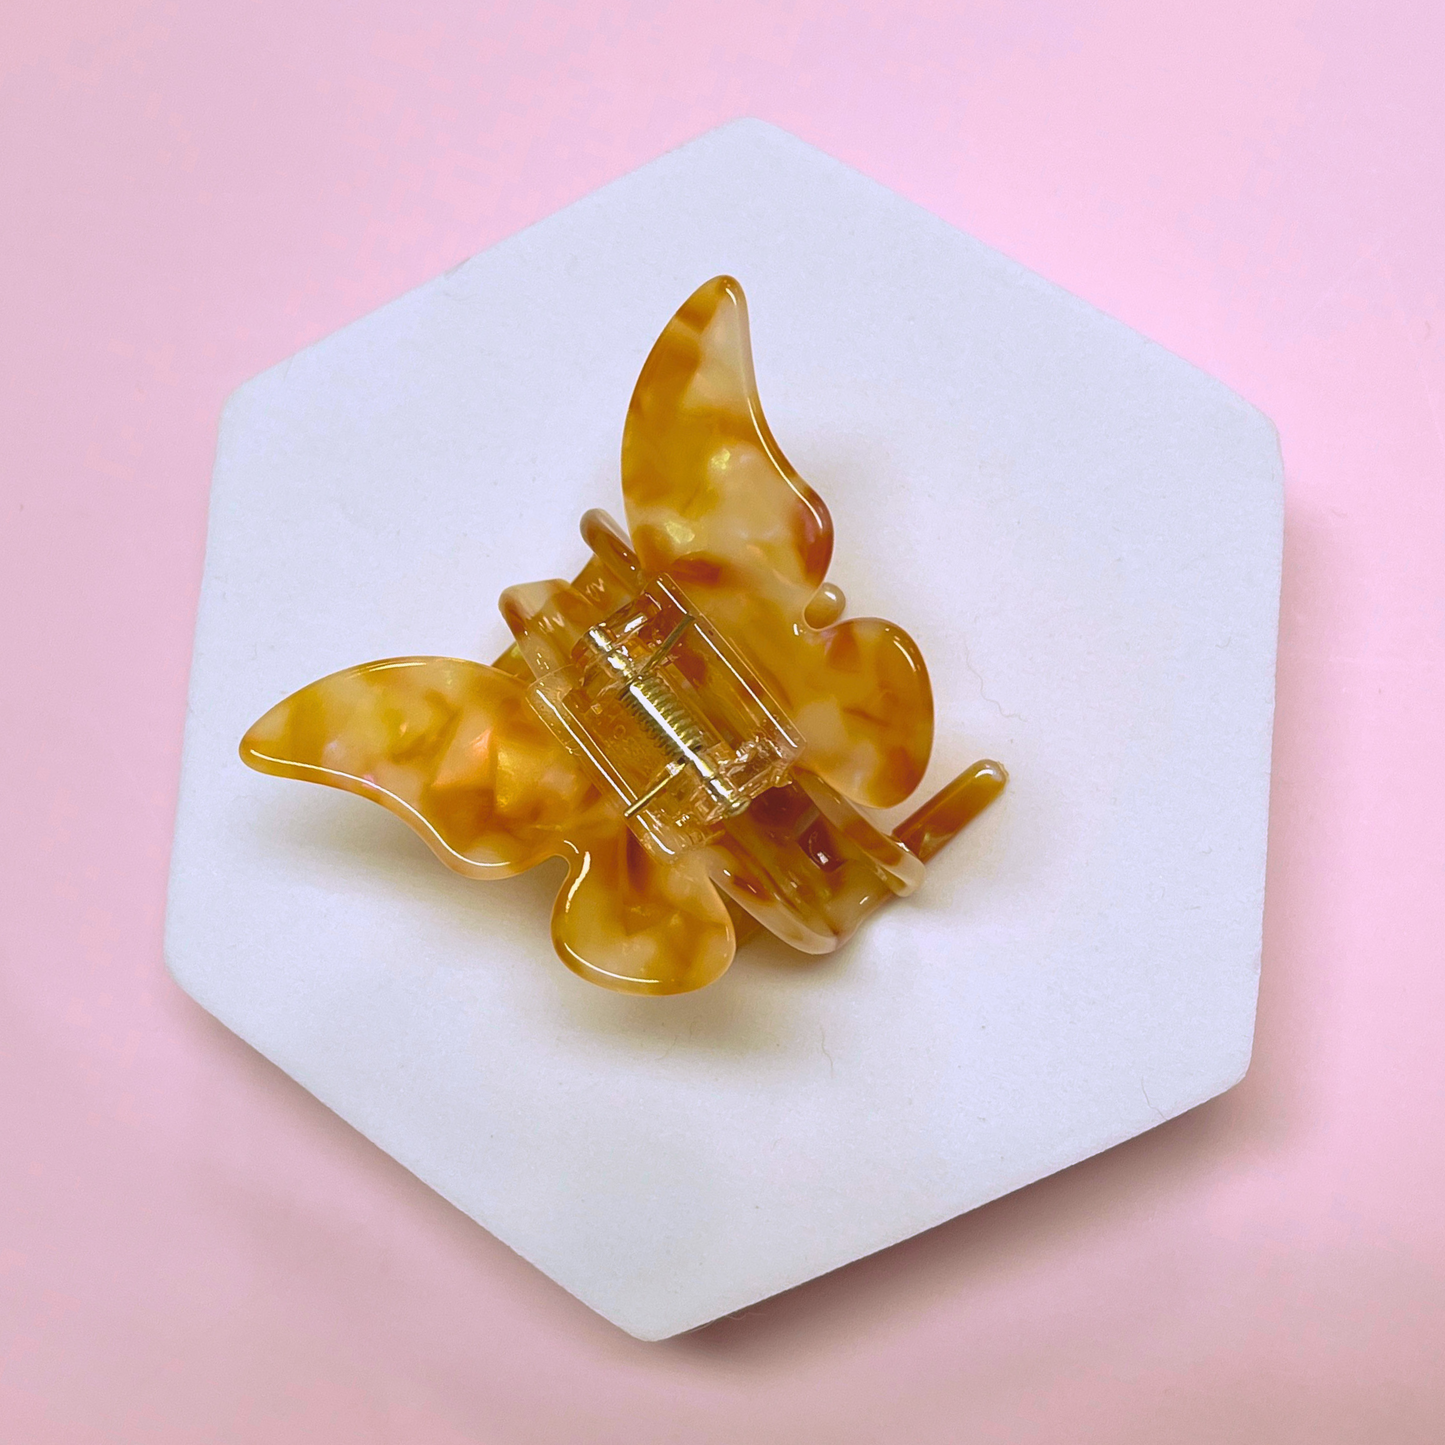 Amelia Cellulose Acetate Hair Claw Clips